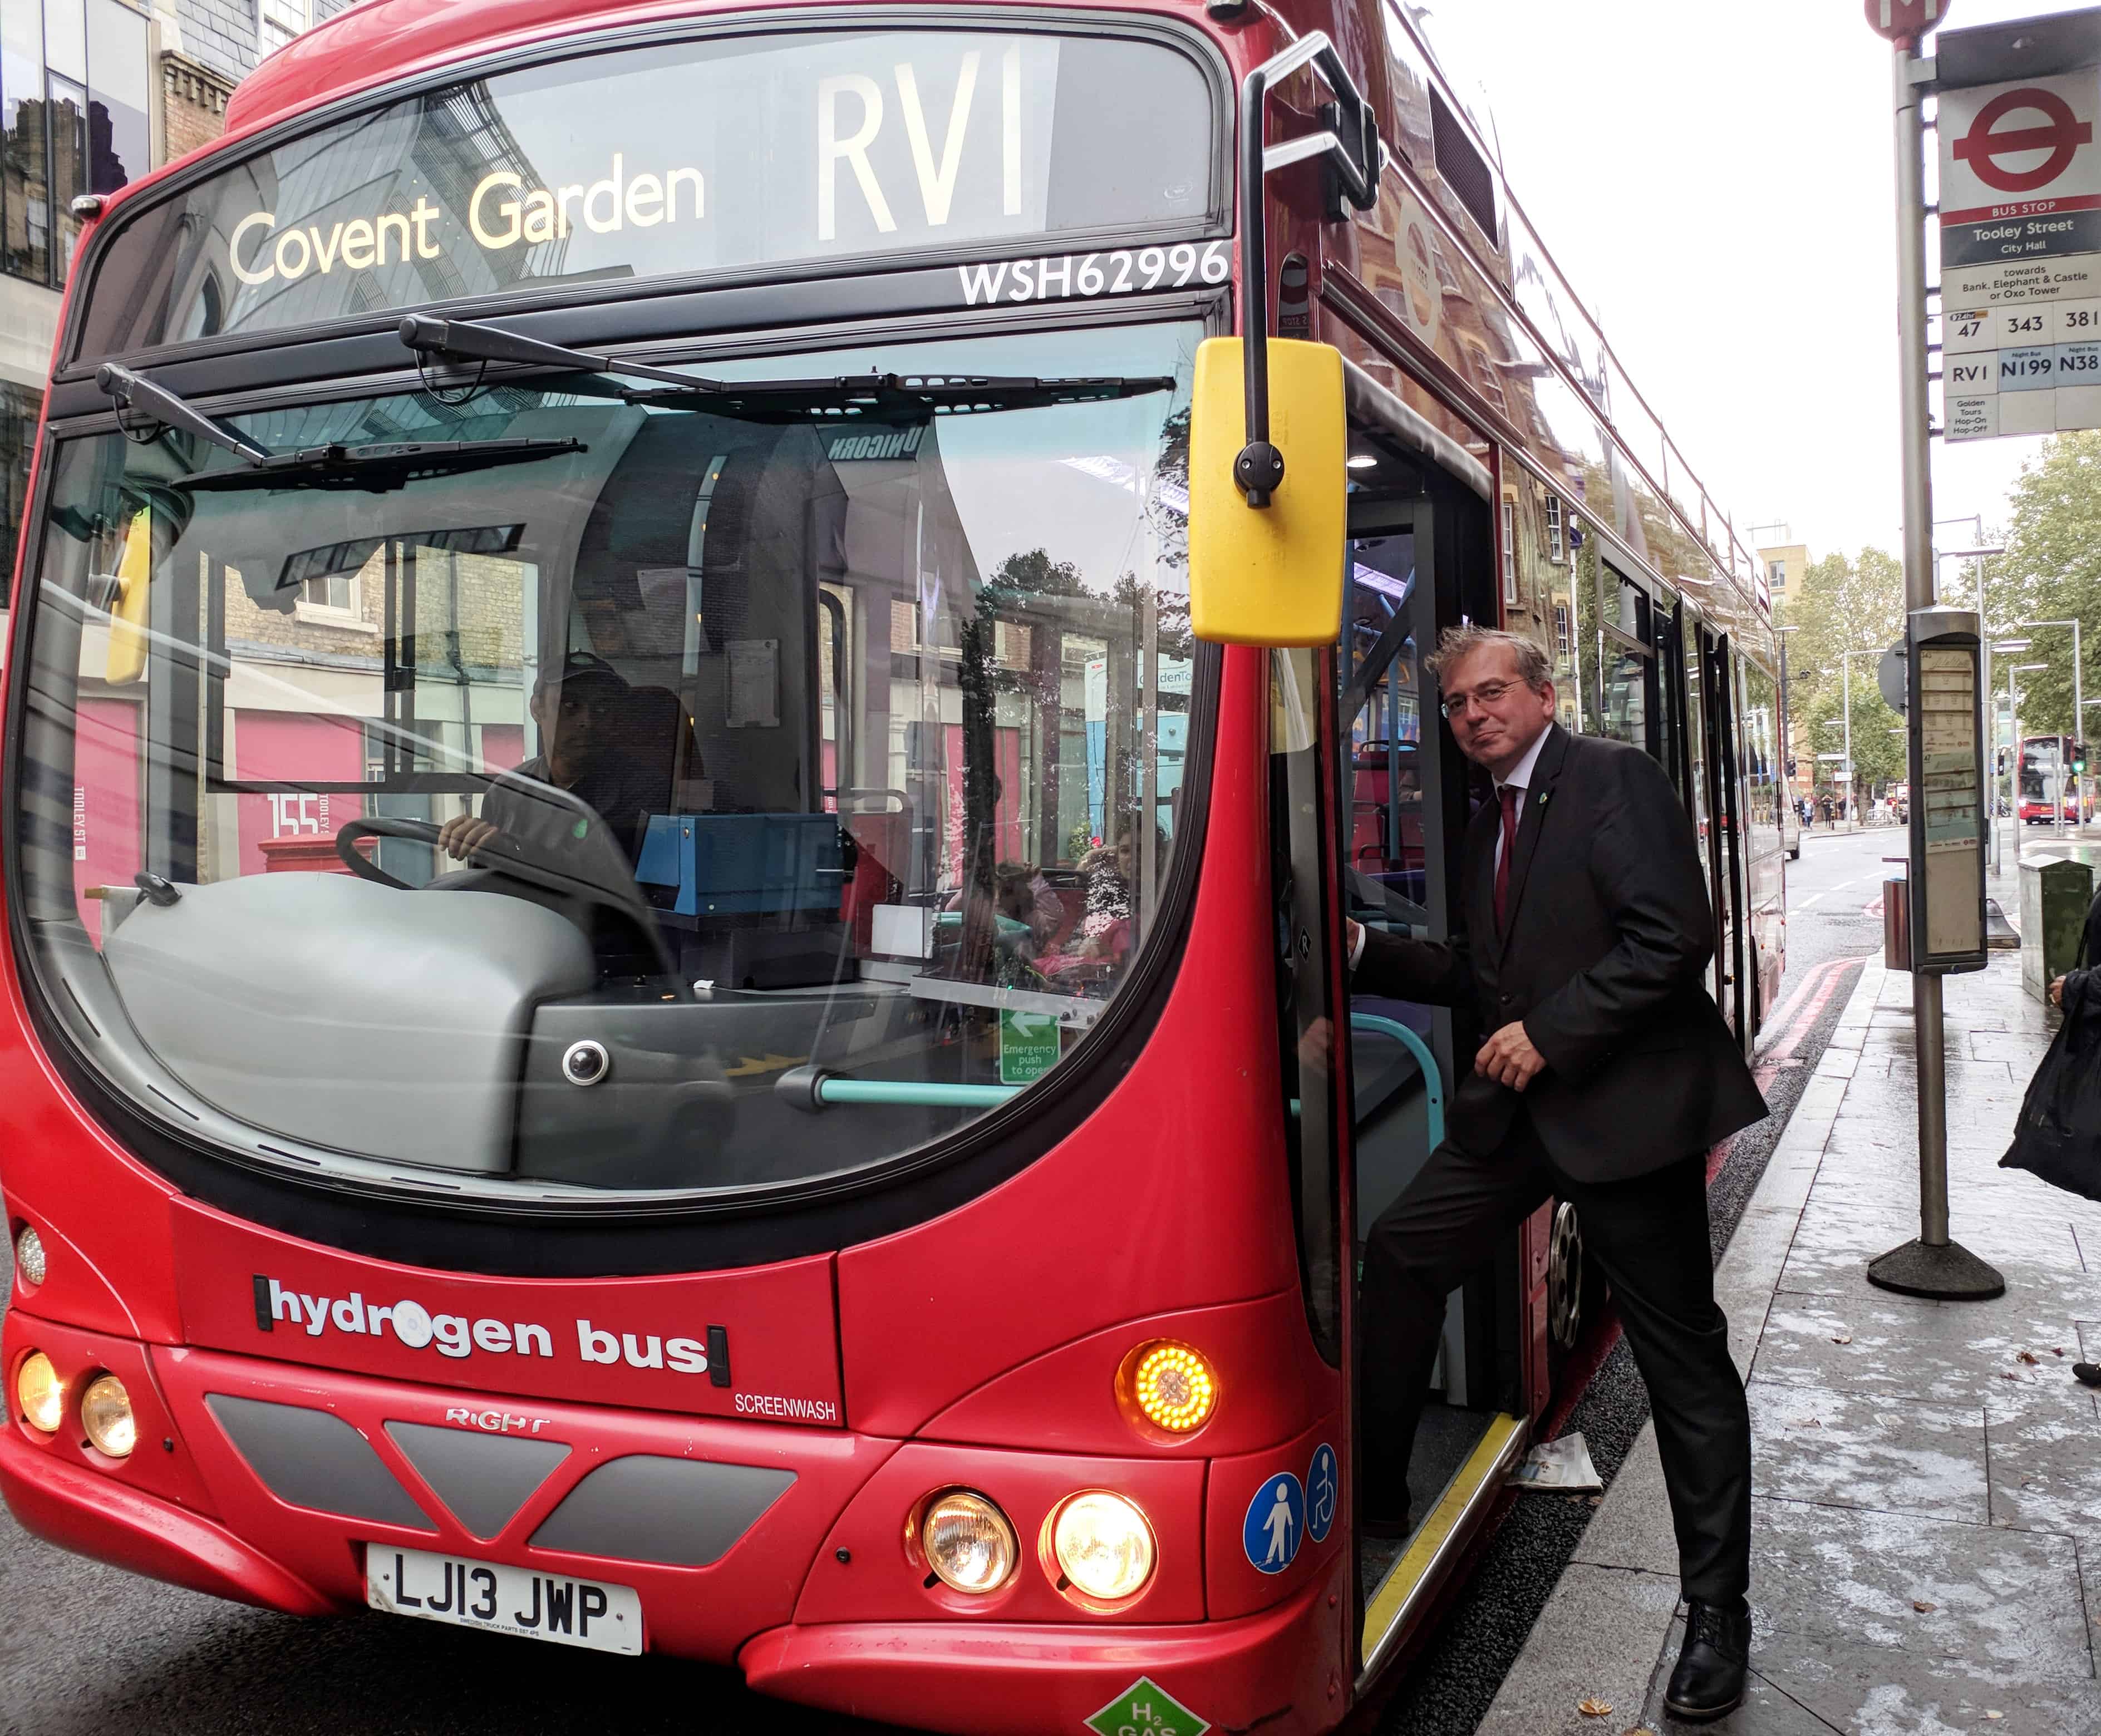 Cllr Livingstone (pictured) slammed the TfL proposals, saying they would hit the disabled and vulnerable the hardest